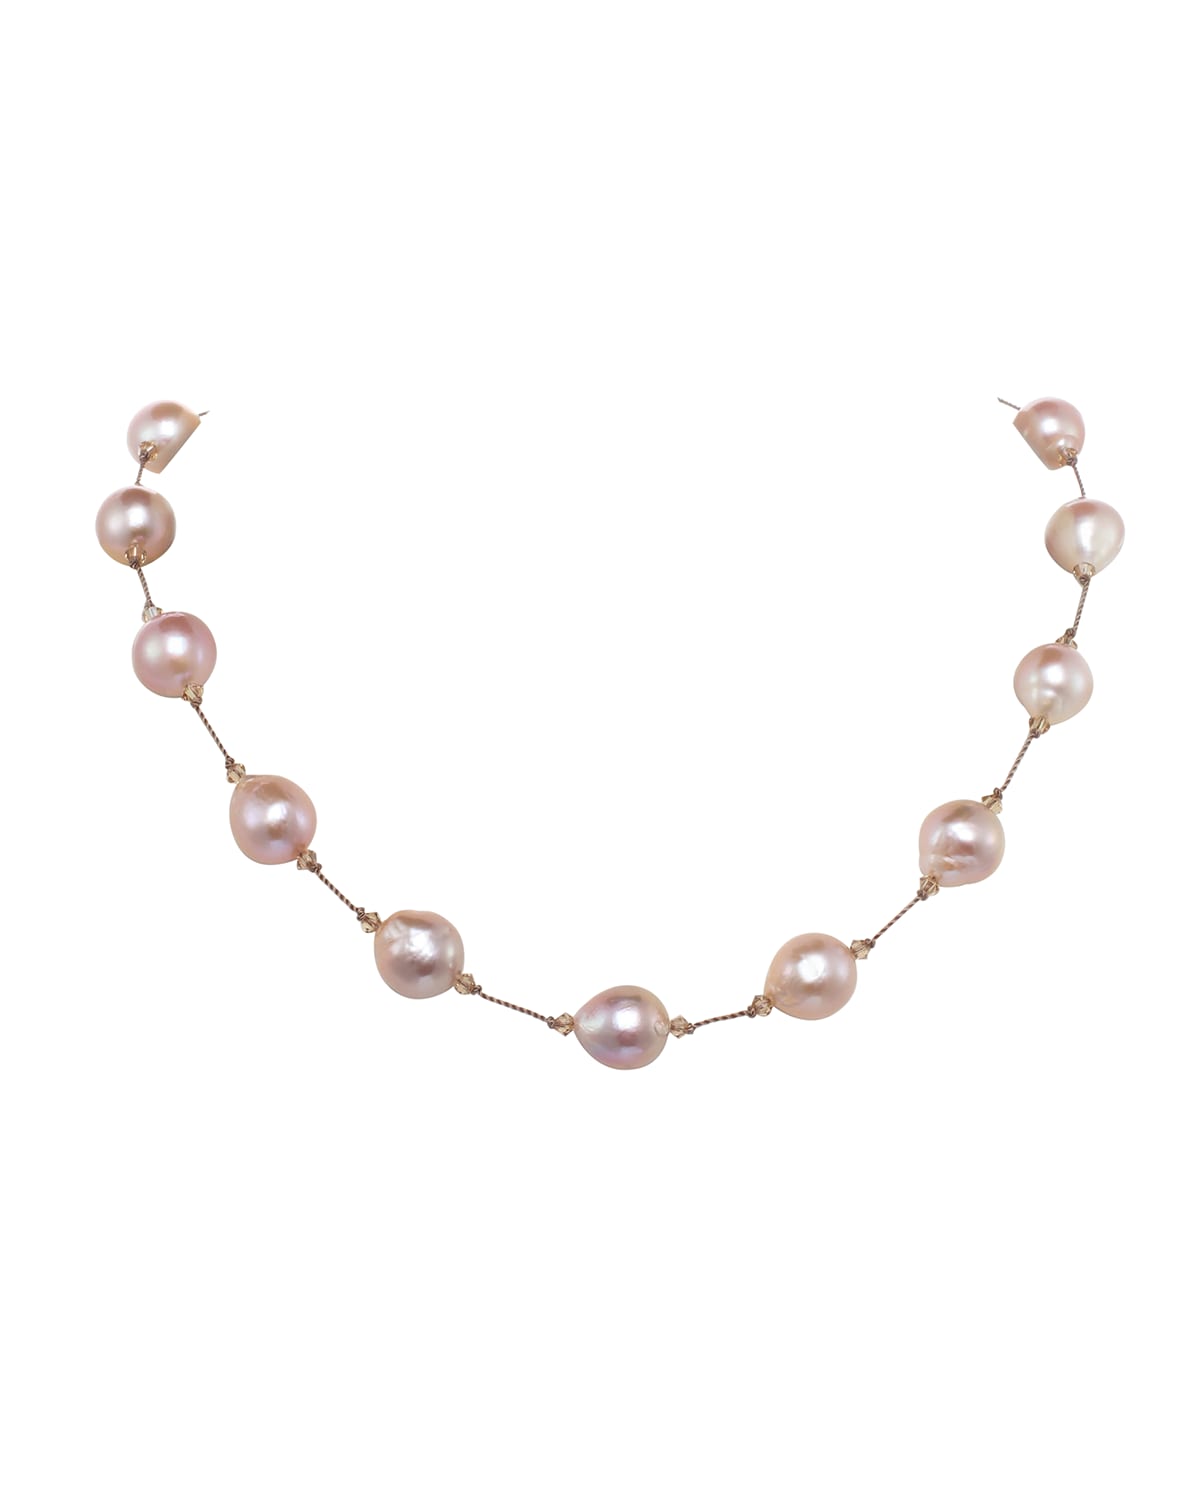 Margo Morrison Small Multicolor Baroque Pearl Necklace with Crystal, Sterling Silver Clasp